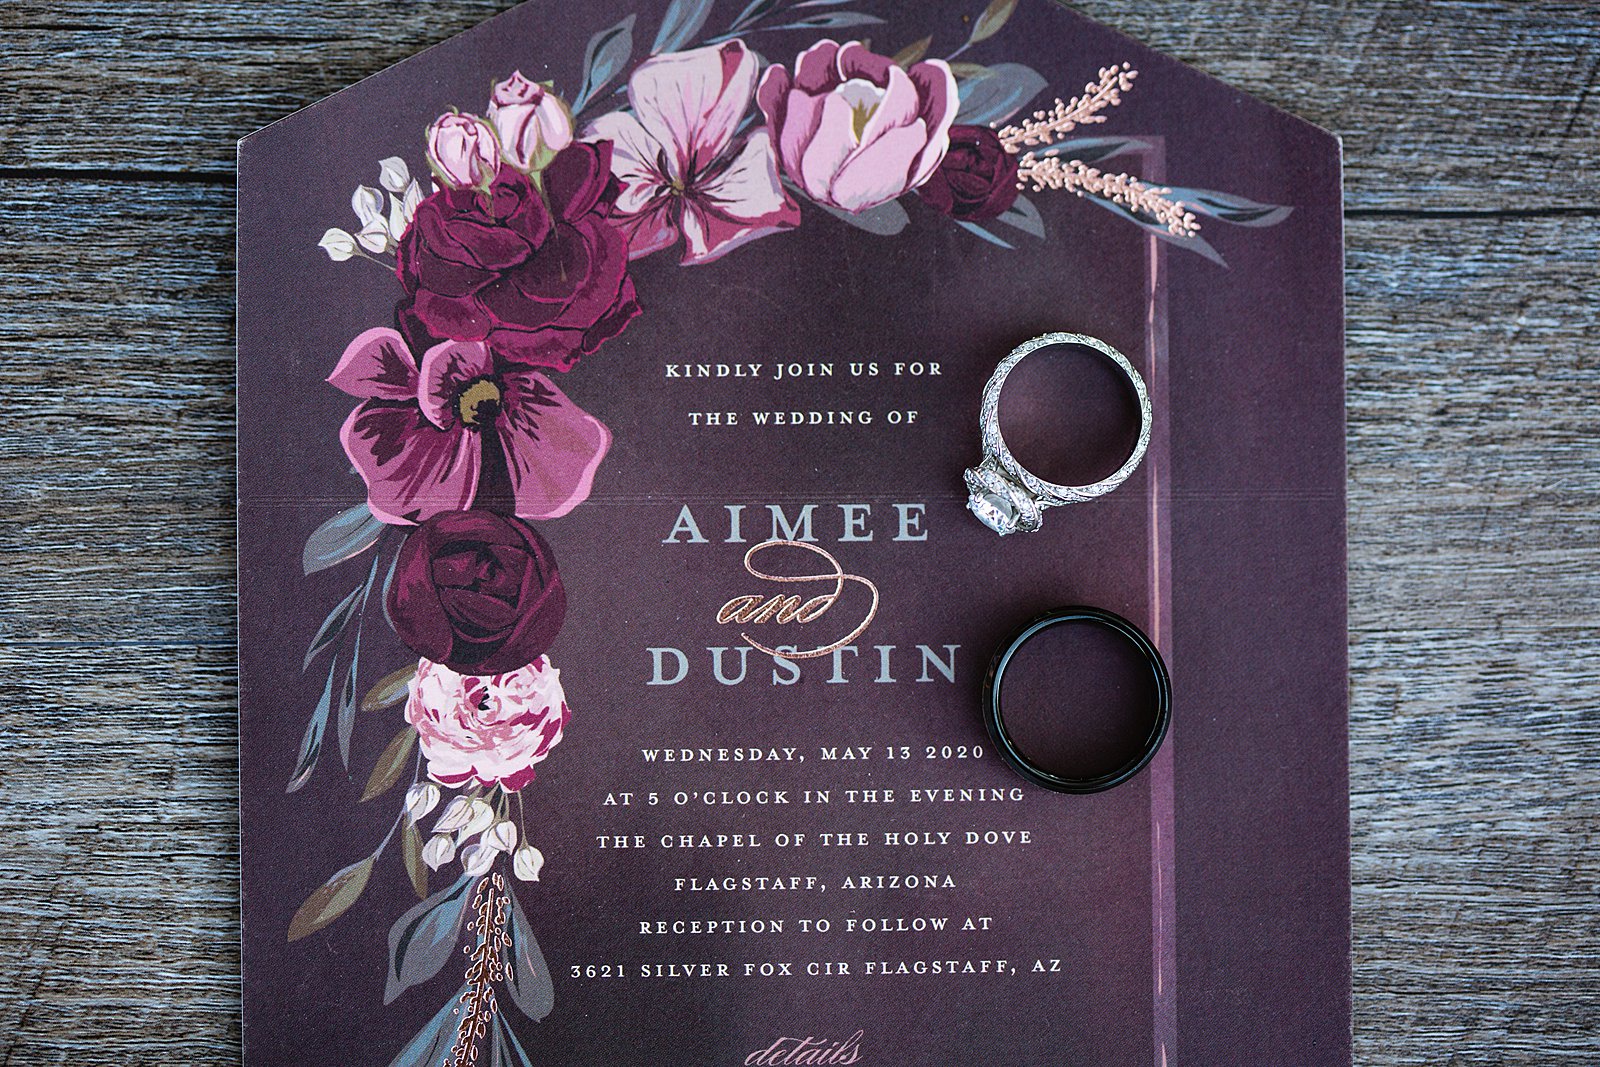 Purple and Maroon floral wedding invitation and wedding rings by PMA Photography.